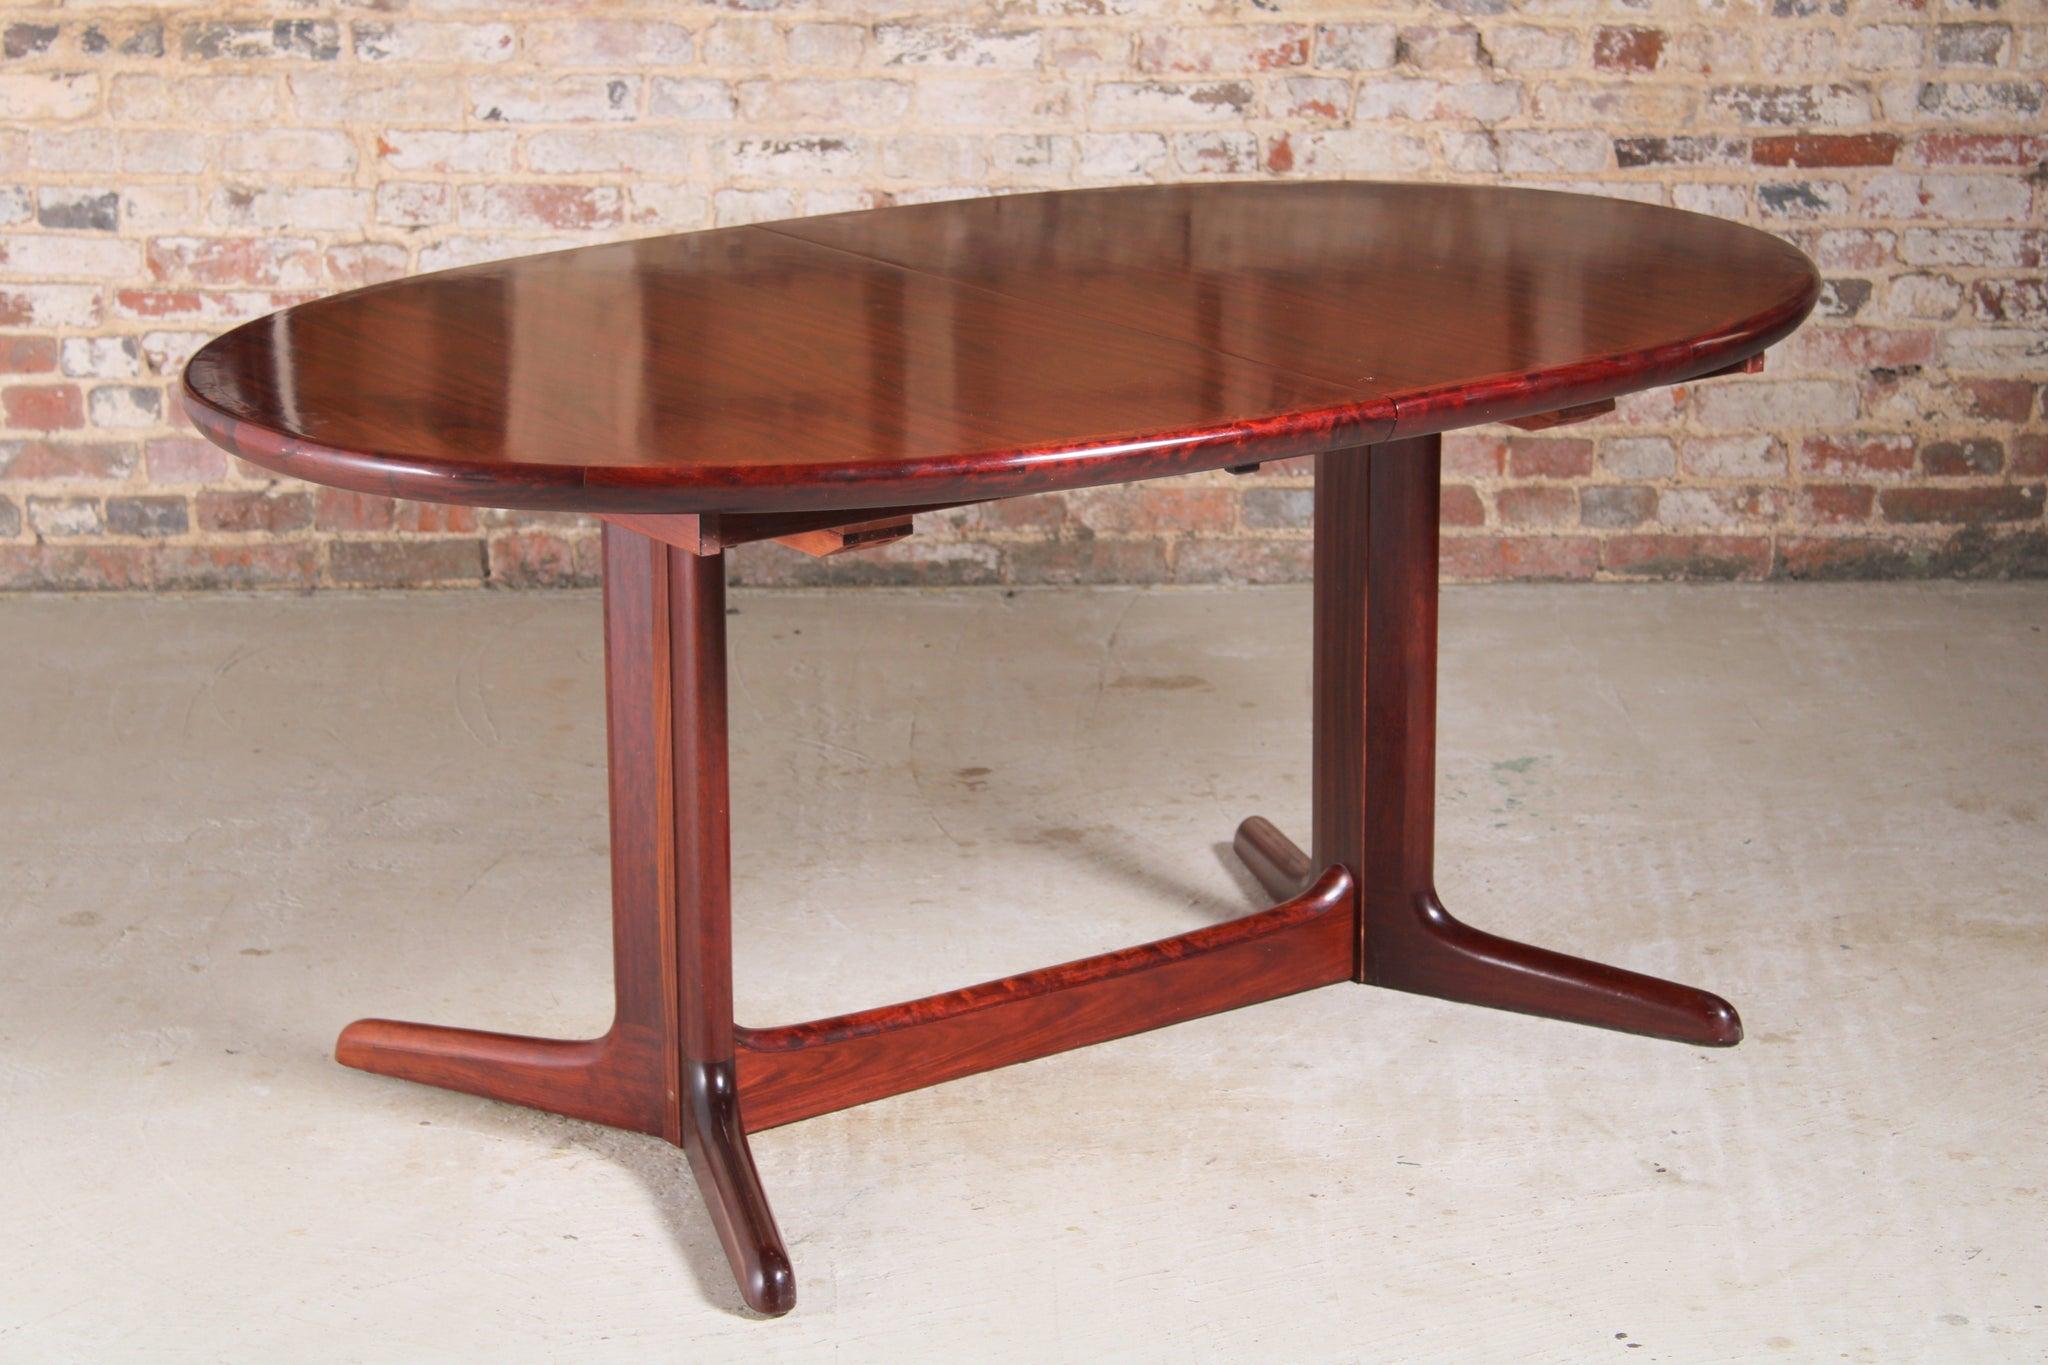 Danish mid century oval rosewood dining table, circa 1970s. 2 Extension leaves stored underneath, seats up to 12 people. 

Dimension: W 164cm/214cm/264cm x D 103cm x H 74cm.